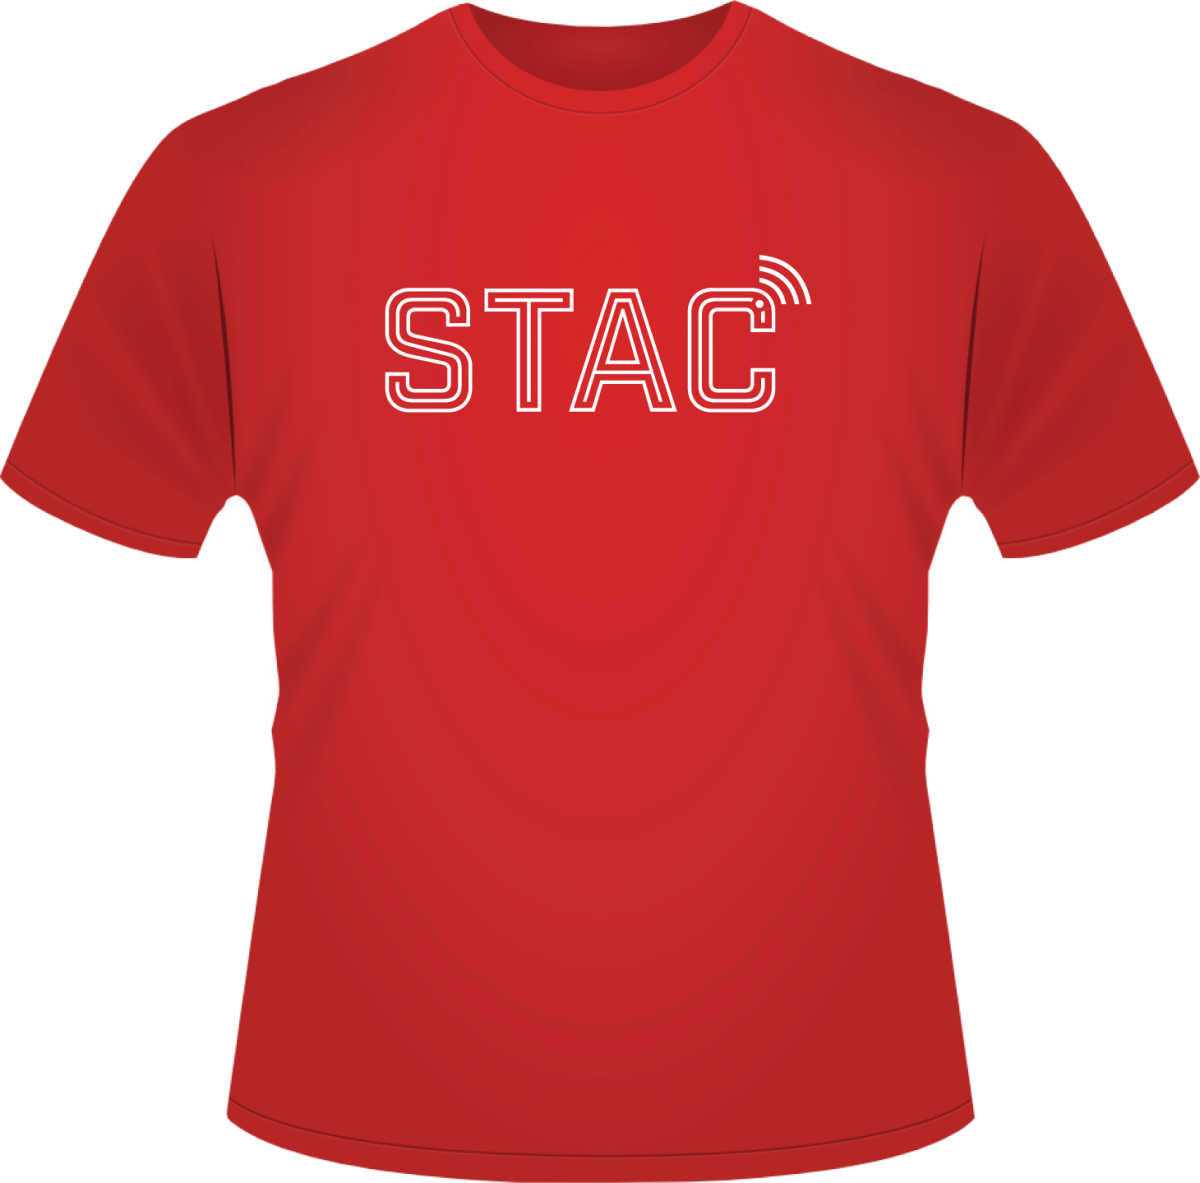 Red STAC T-shirt